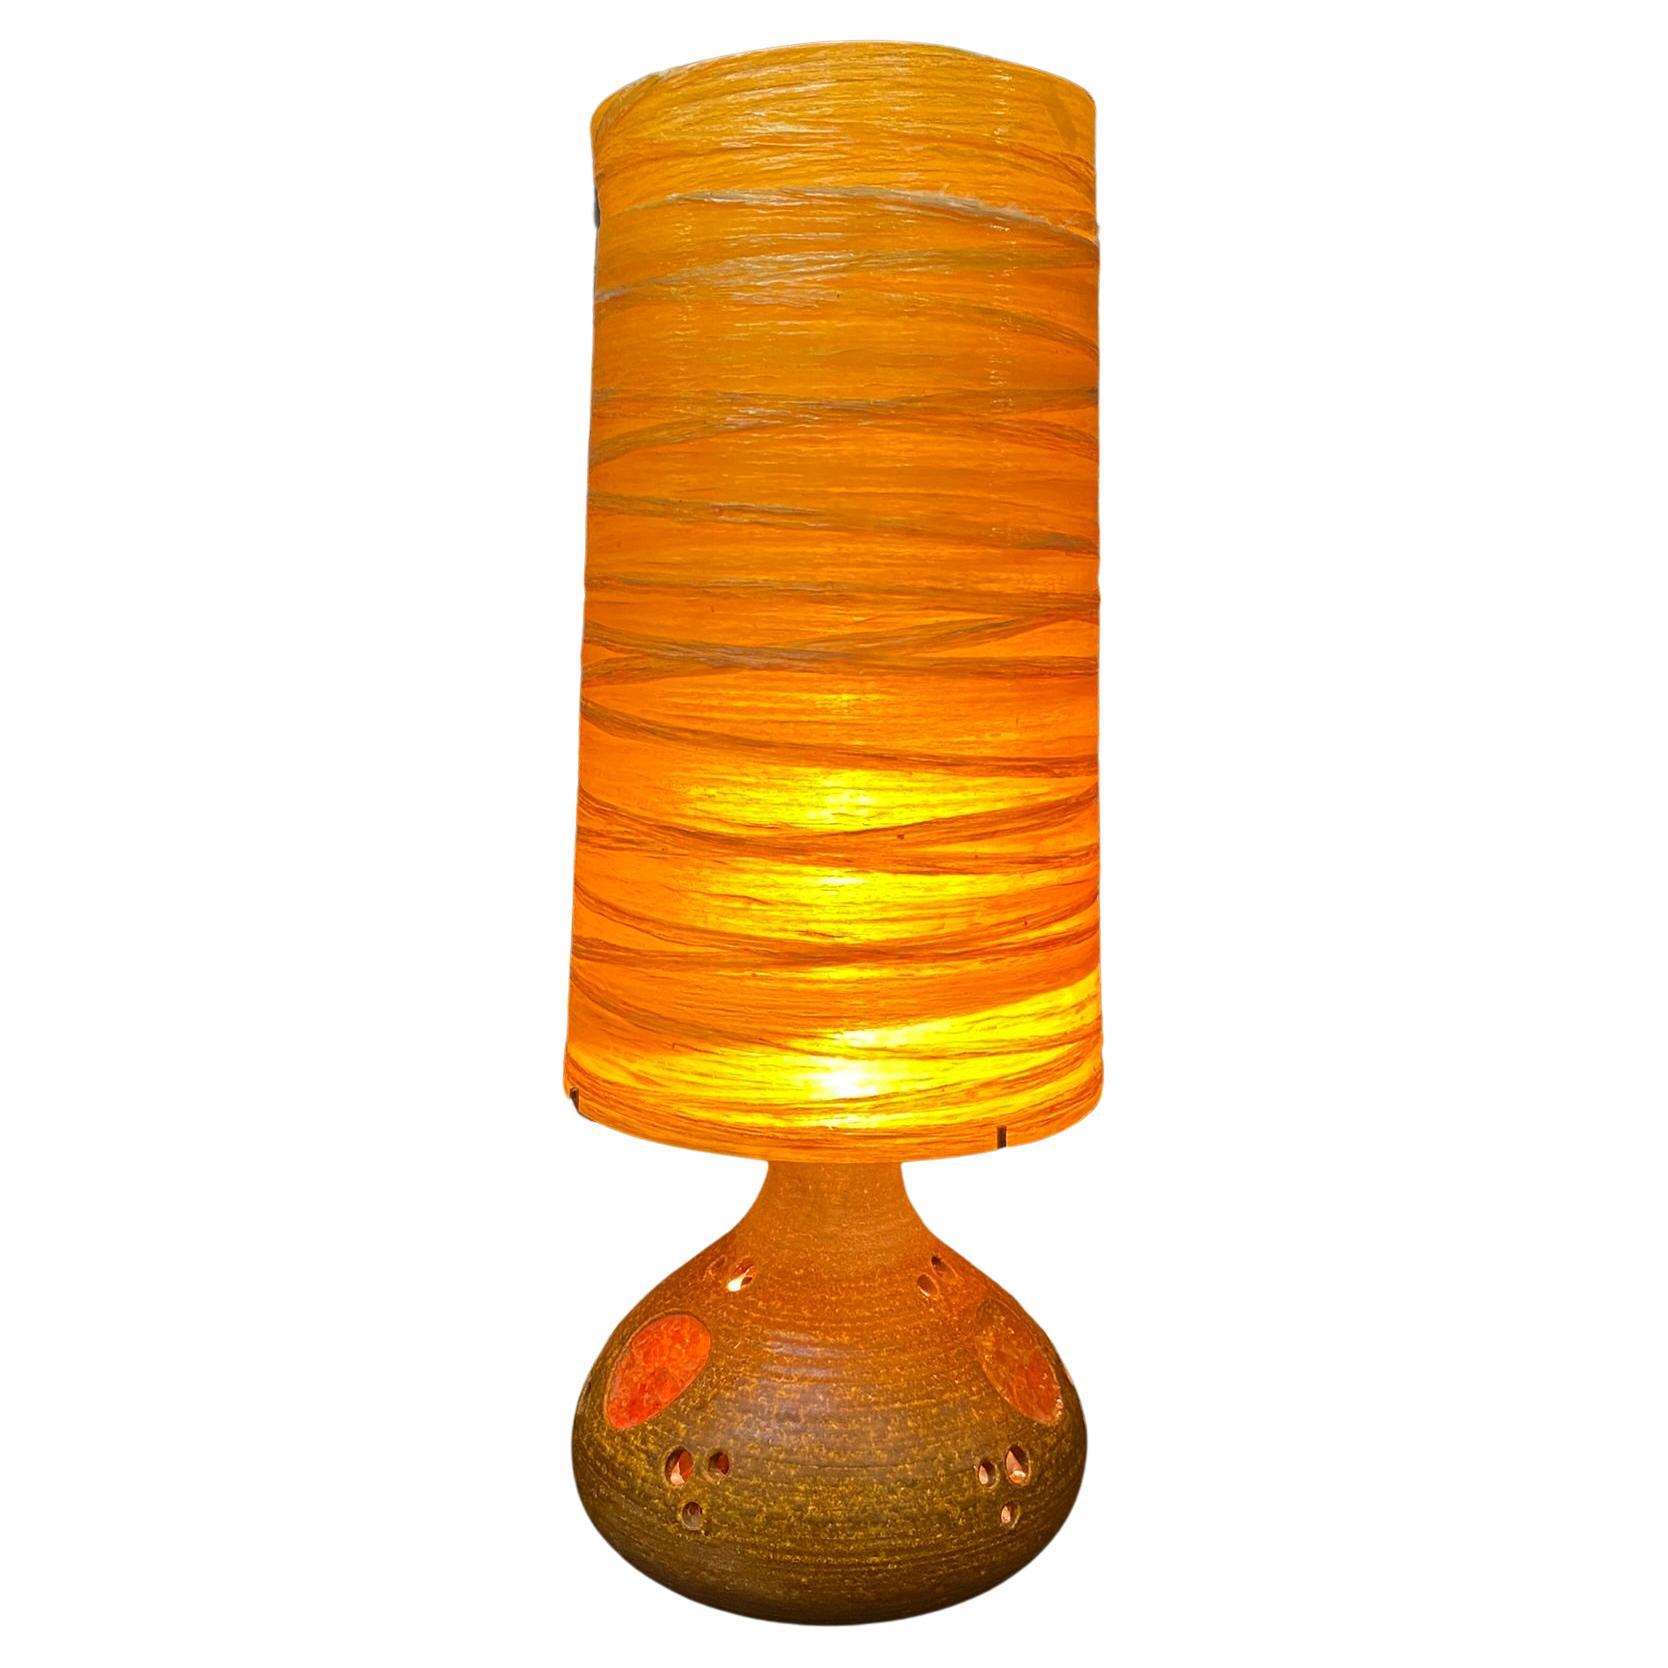 Terracotta Lamp and its Original Lampshade in Colored Resin, Also with Interior For Sale